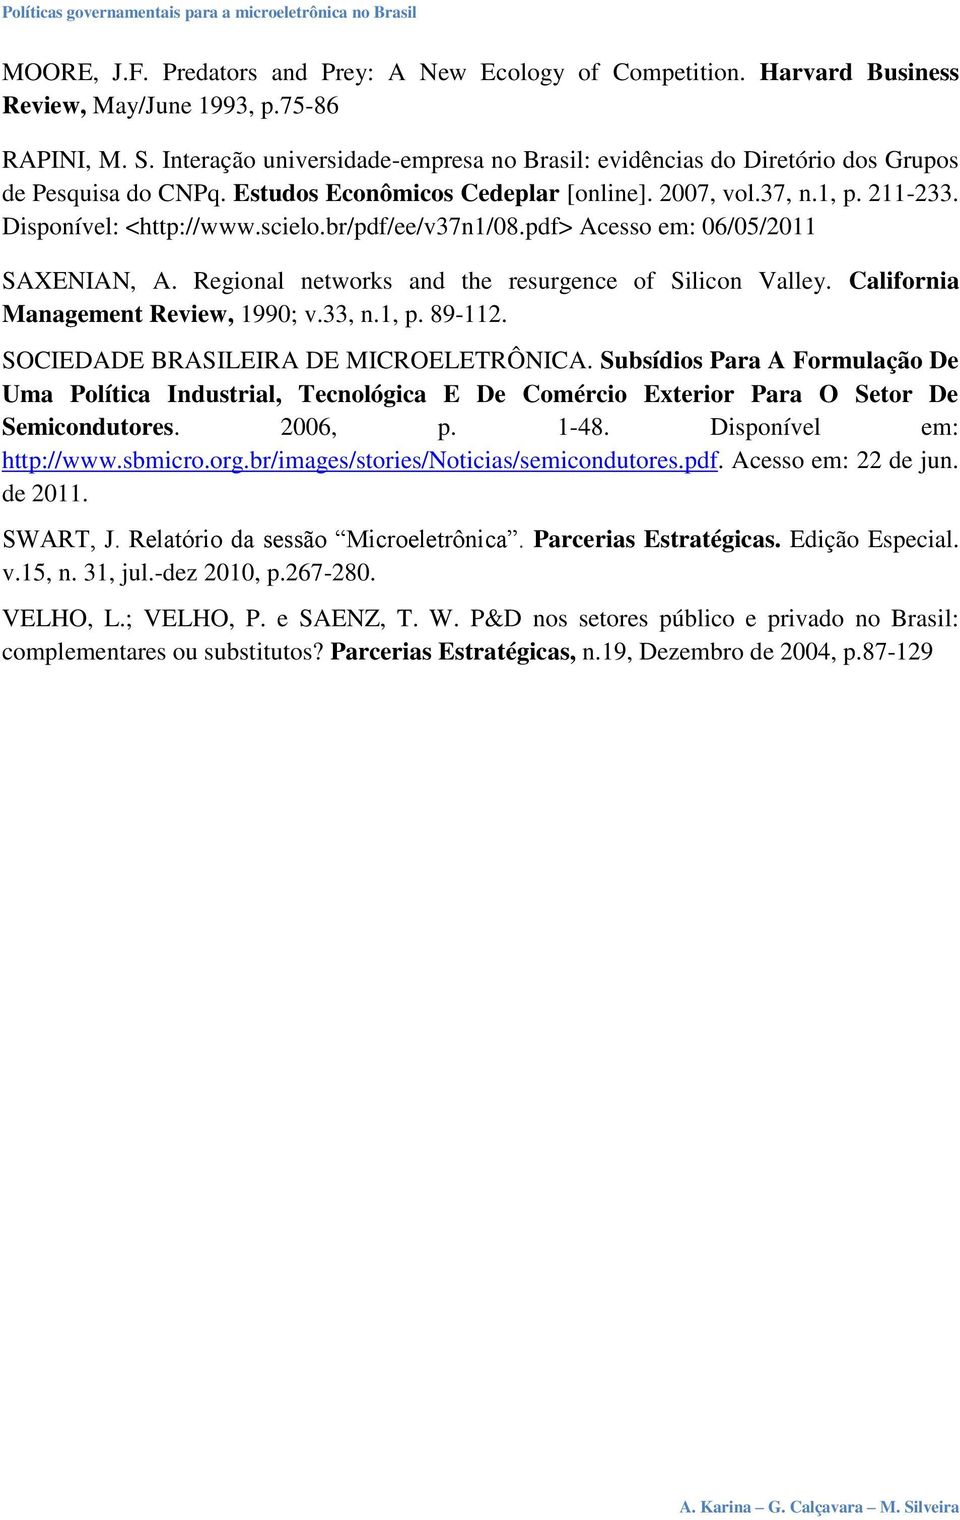 br/pdf/ee/v37n1/08.pdf> Acesso em: 06/05/2011 SAXENIAN, A. Regional networks and the resurgence of Silicon Valley. California Management Review, 1990; v.33, n.1, p. 89-112.